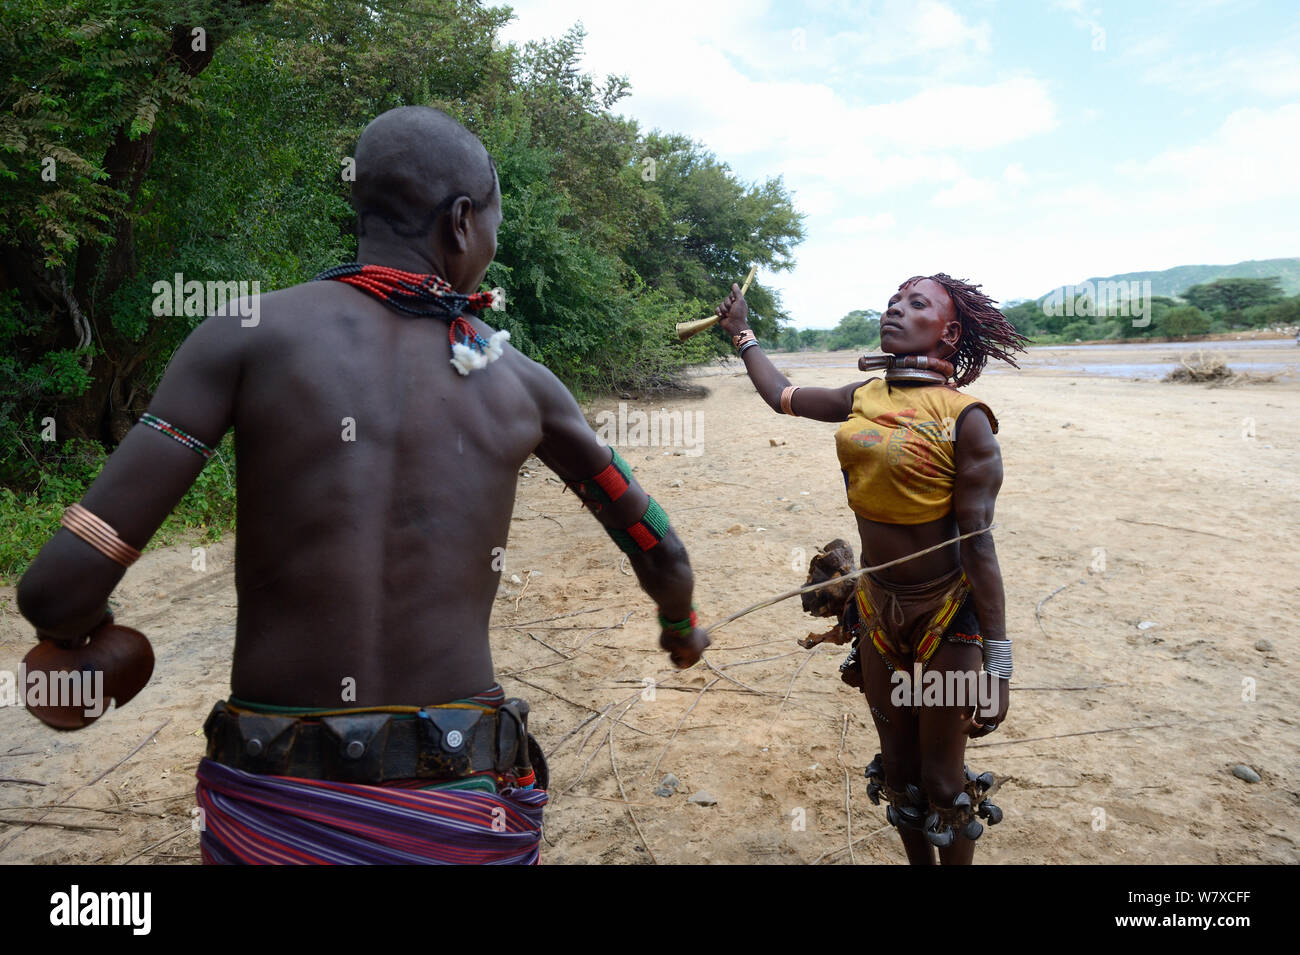 During the Ukuli ceremony and before the bull jumping, the Maza (young initiated men) whip the Hamer women who will defy them, showing no fear or signs of pain. Hamer tribe, Omo river Valley, Ethiopia, September 2014. Stock Photo